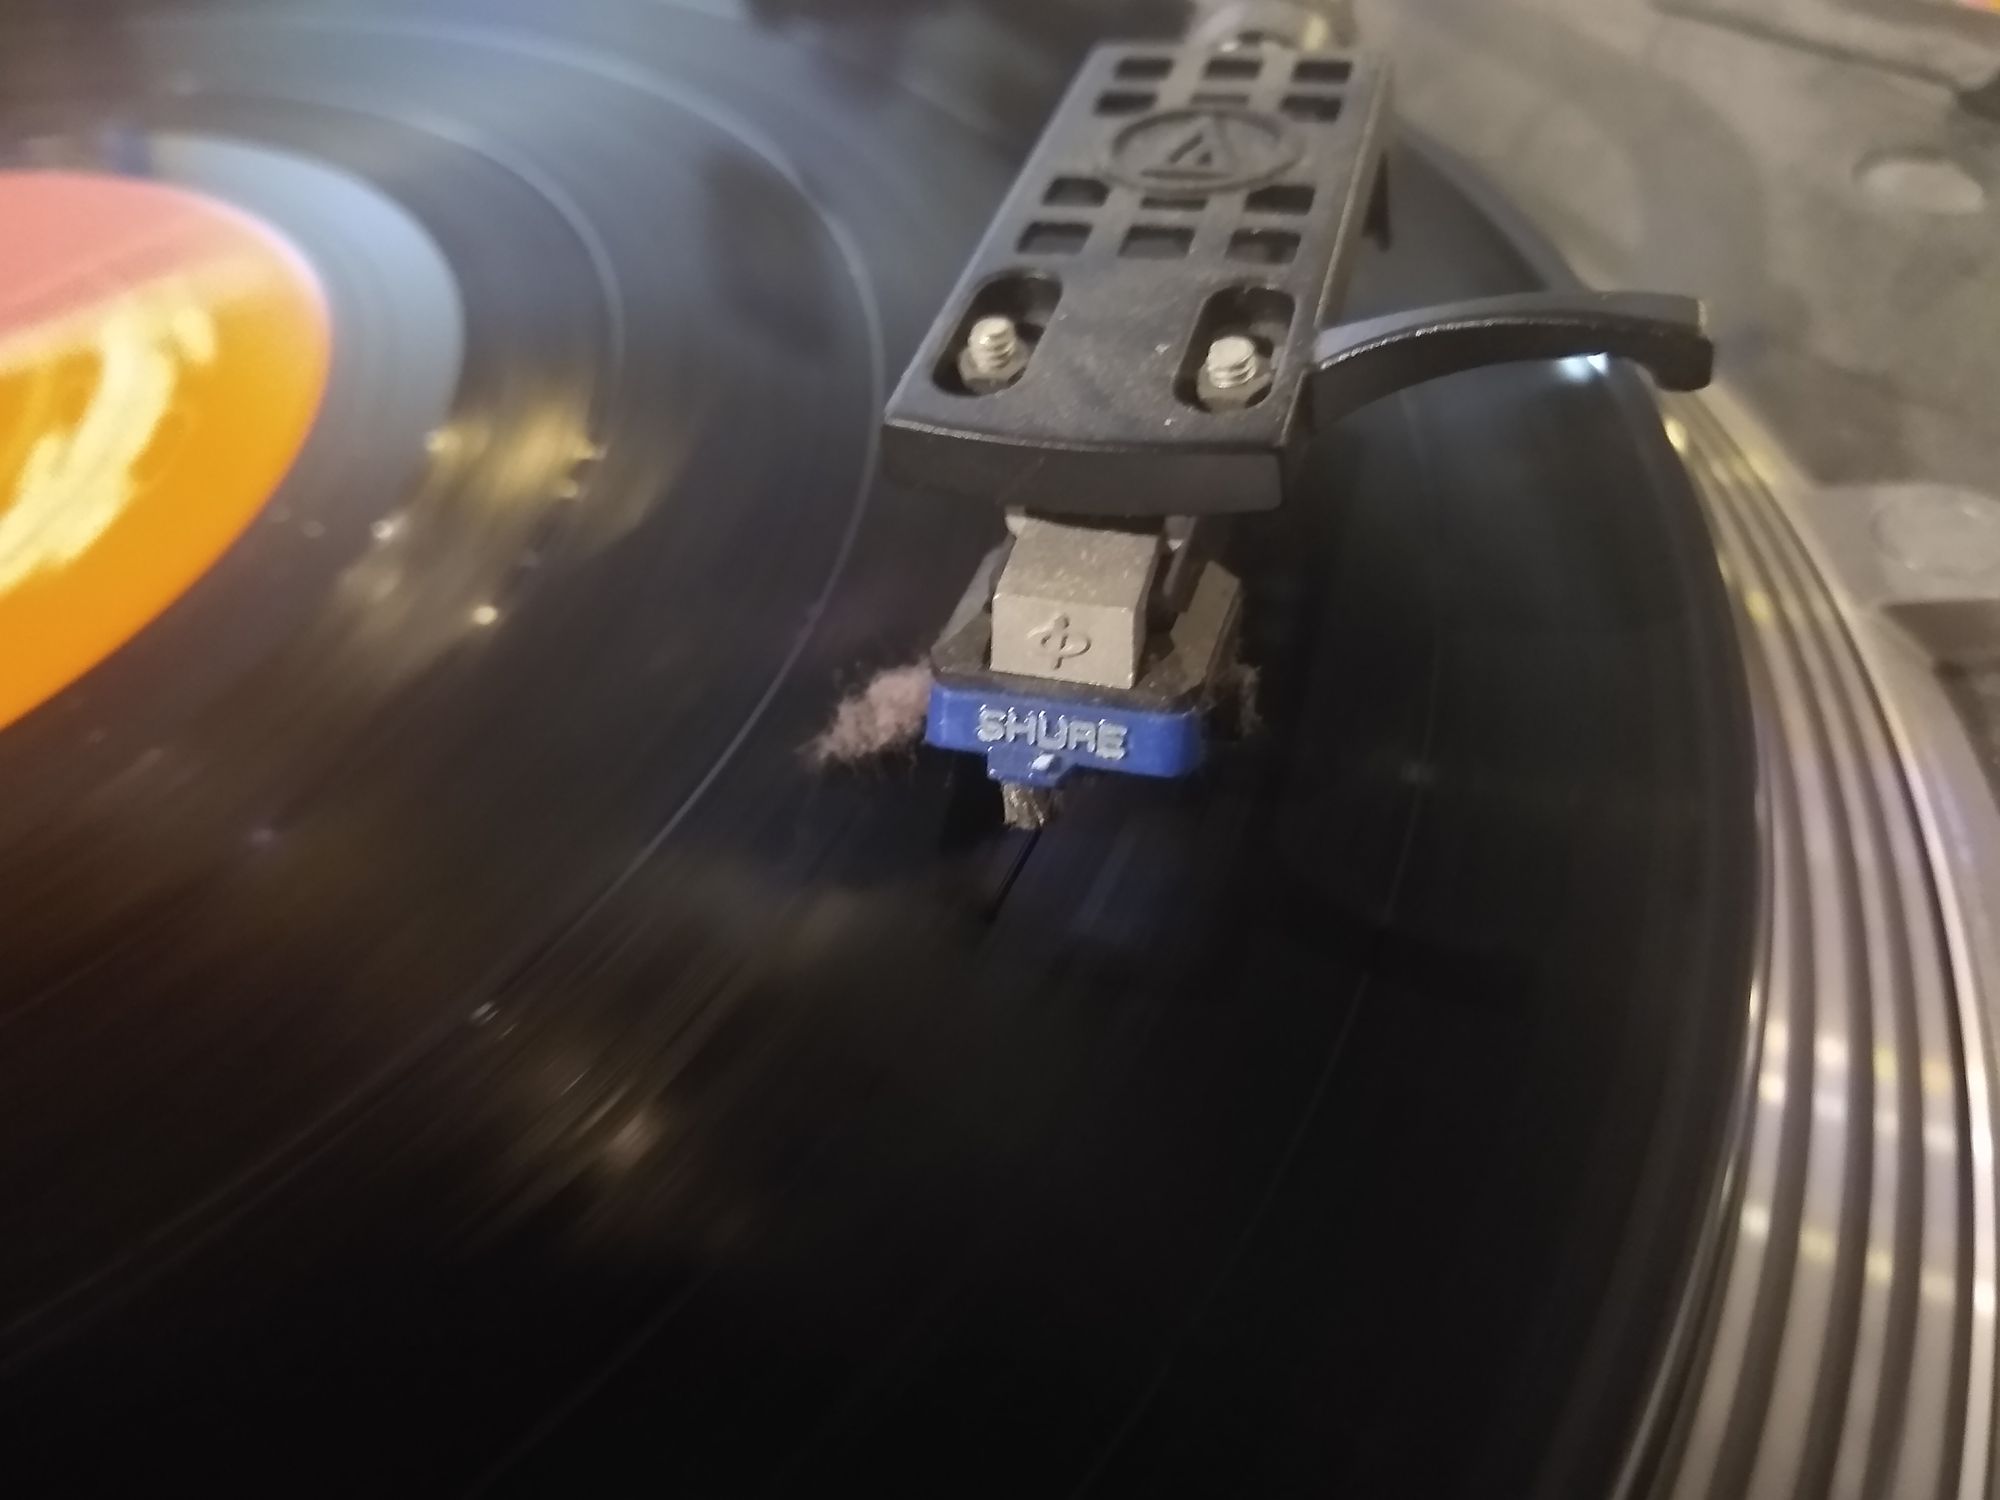 Picture of a vinyl record being played, with a seriously large amount of dust under the cartridge